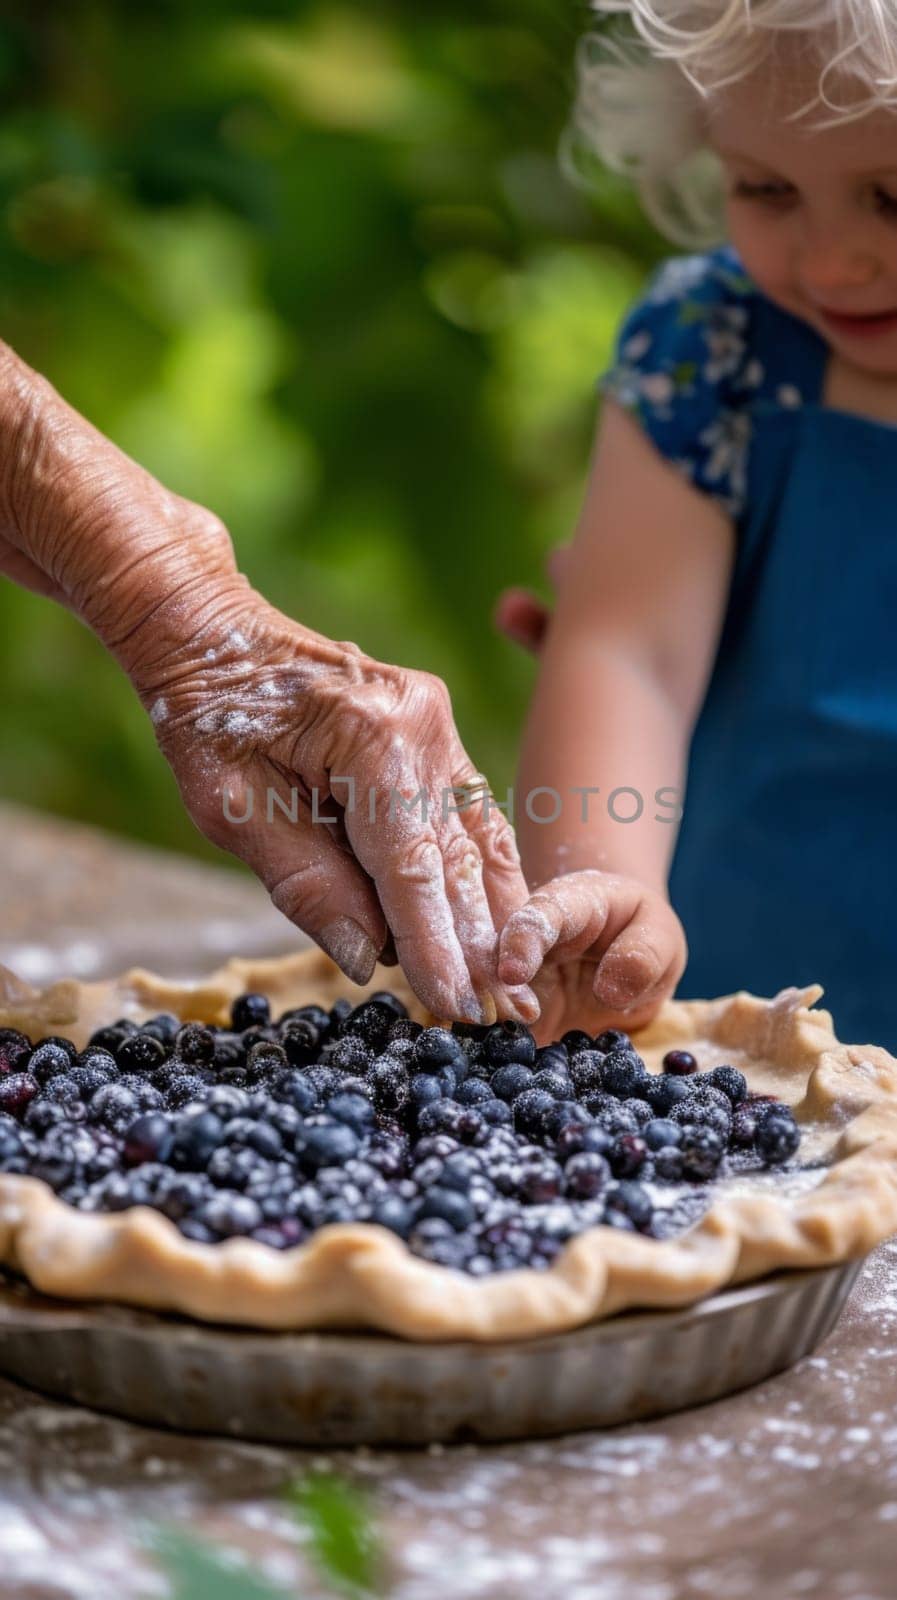 A person is touching a blueberry pie with their hands, AI by starush